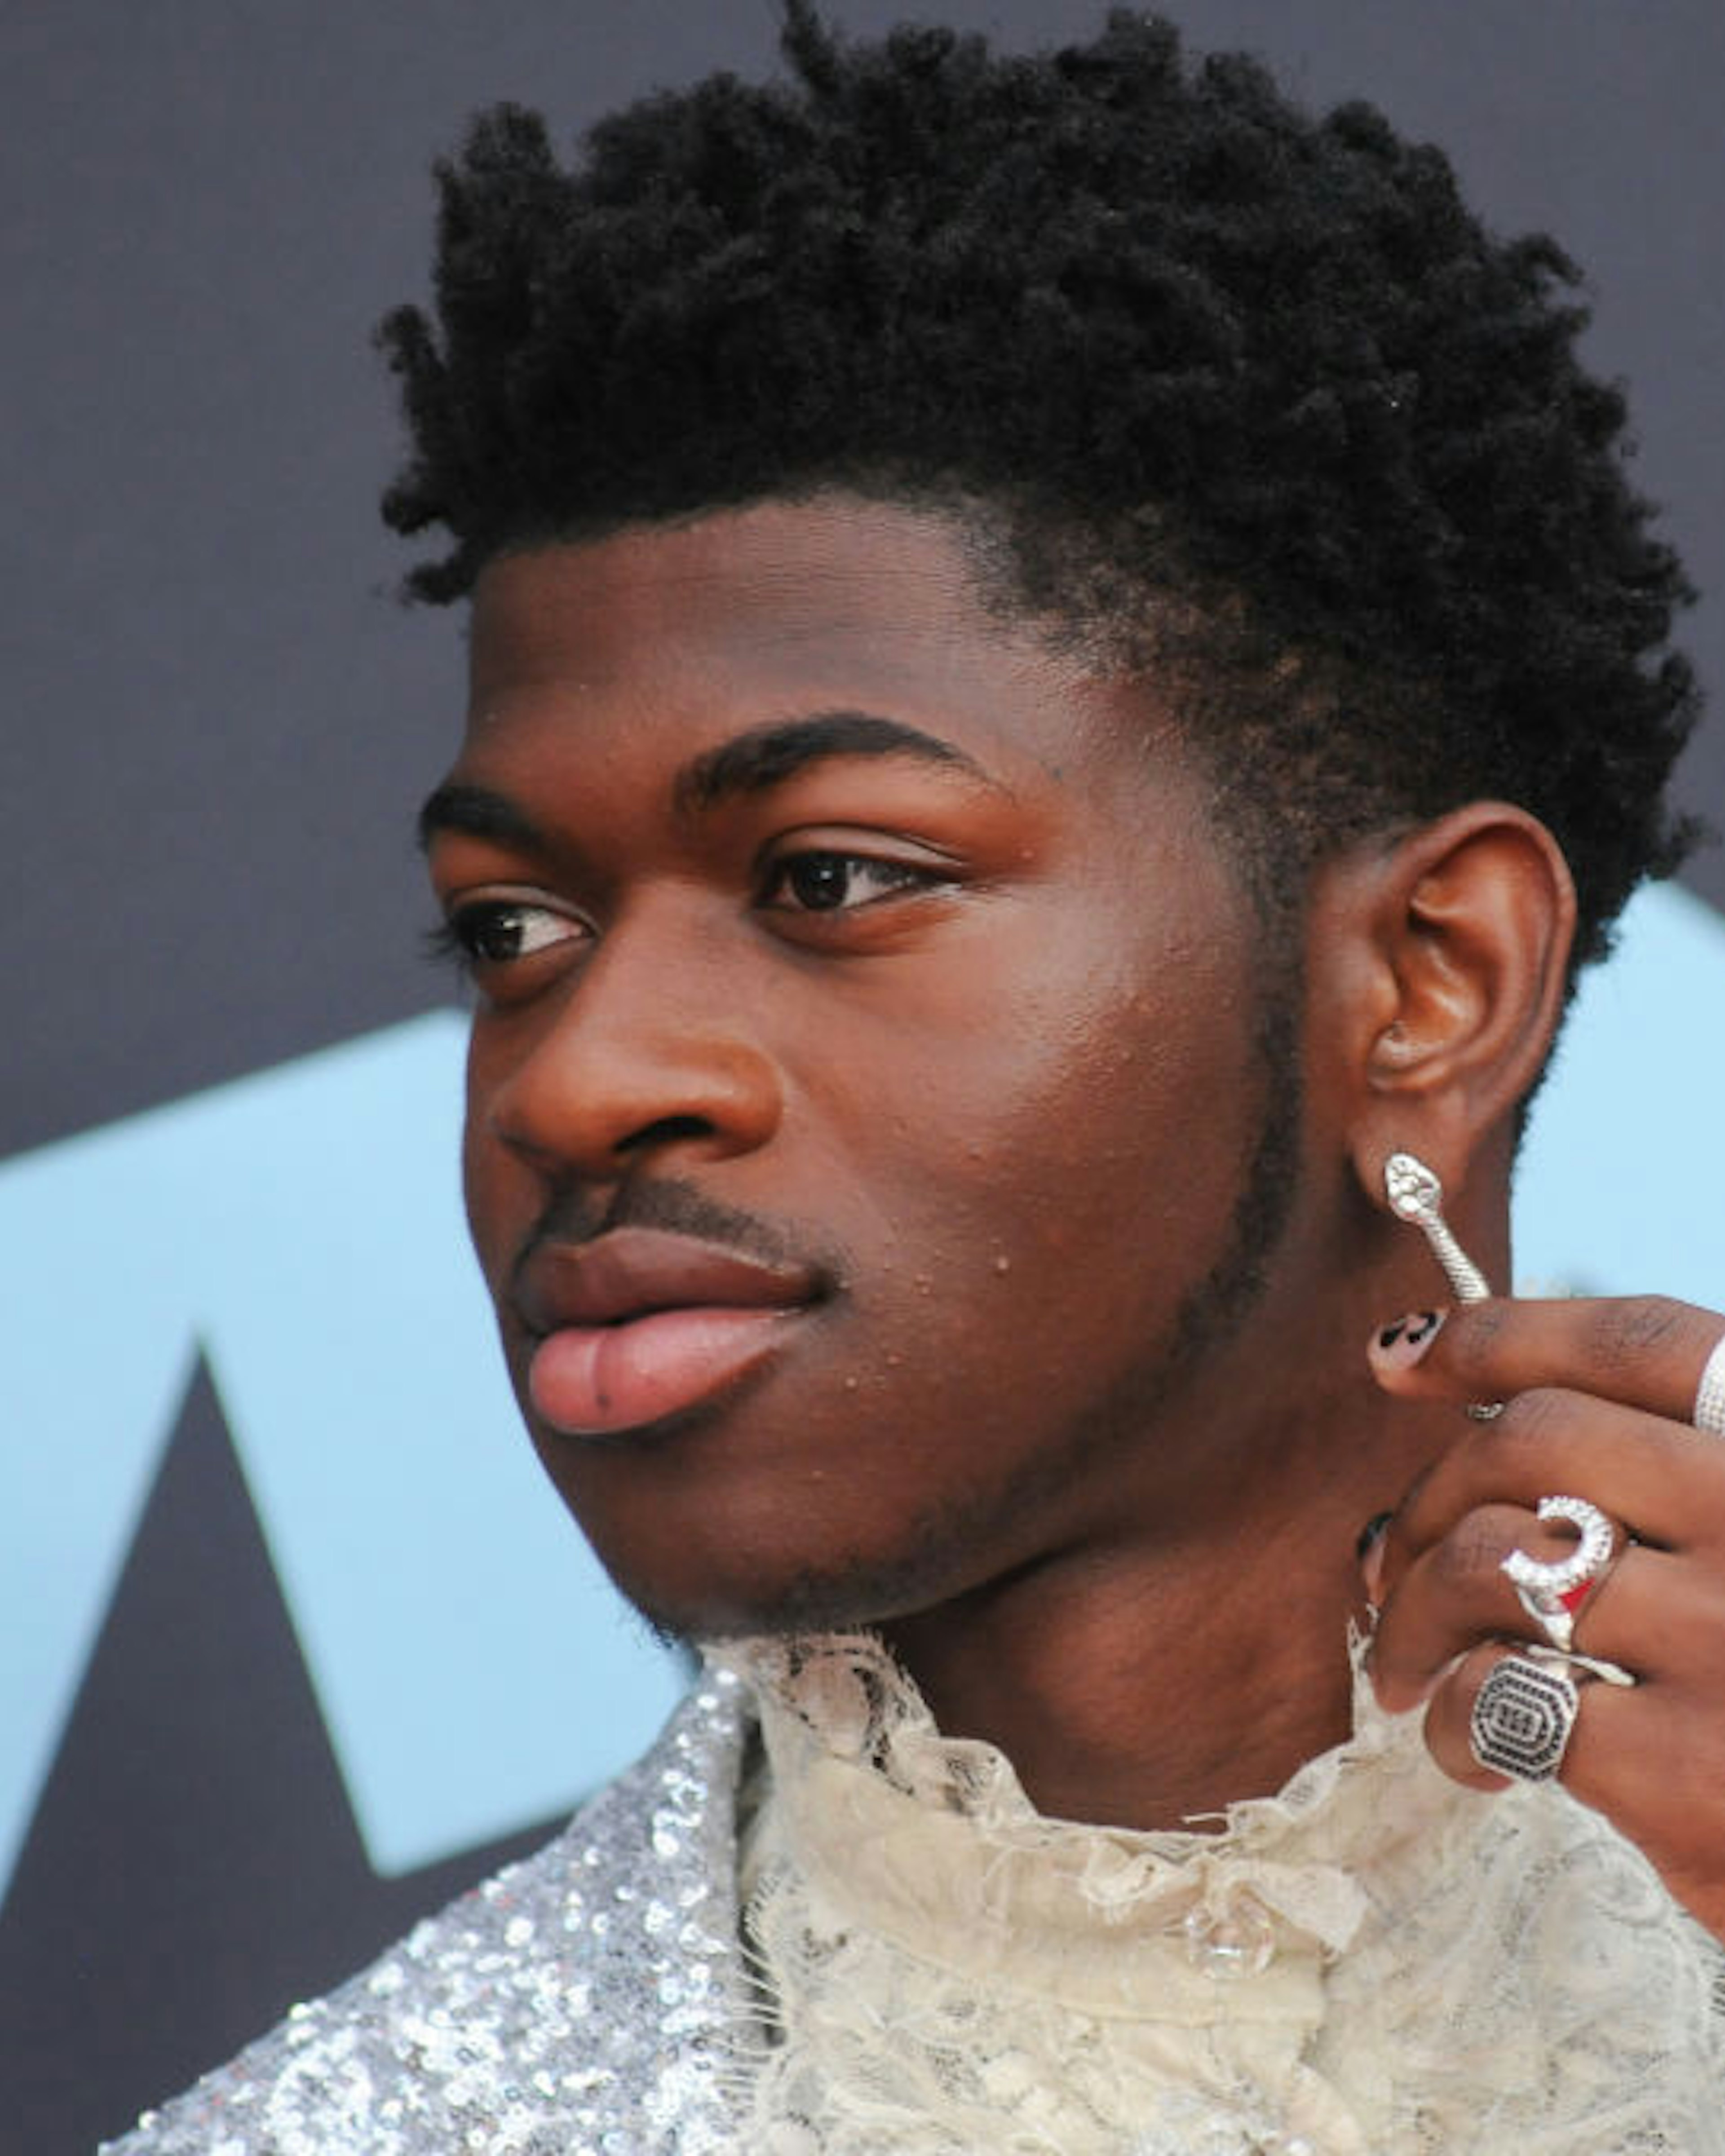 PRUDENTIAL CENTER, NEWARK, NEW JERSEY, UNITED STATES - 2019/08/26: Lil Nas X (Montero Lamar Hill) attends the 2019 MTV Video Music Video Awards held at the Prudential Center in Newark, NJ. (Photo by Efren Landaos/SOPA Images/LightRocket via Getty Images)